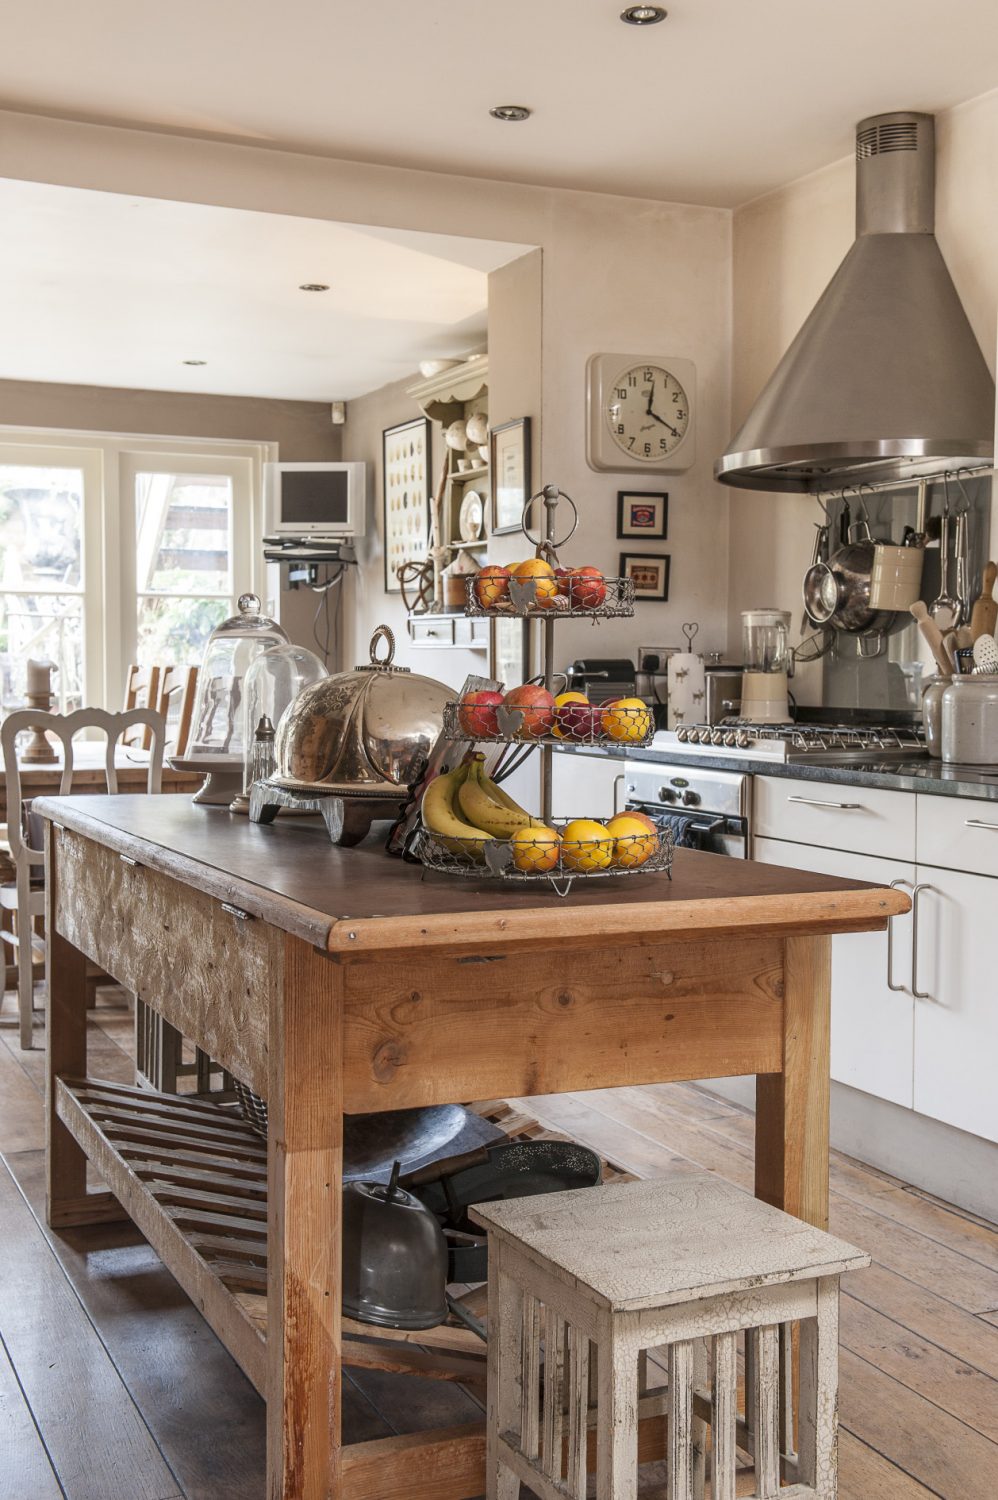 The kitchen section is divided invisibly down the middle – the business side all black granite and steel and the other a far warmer world of soft shades, shadows and antique wood